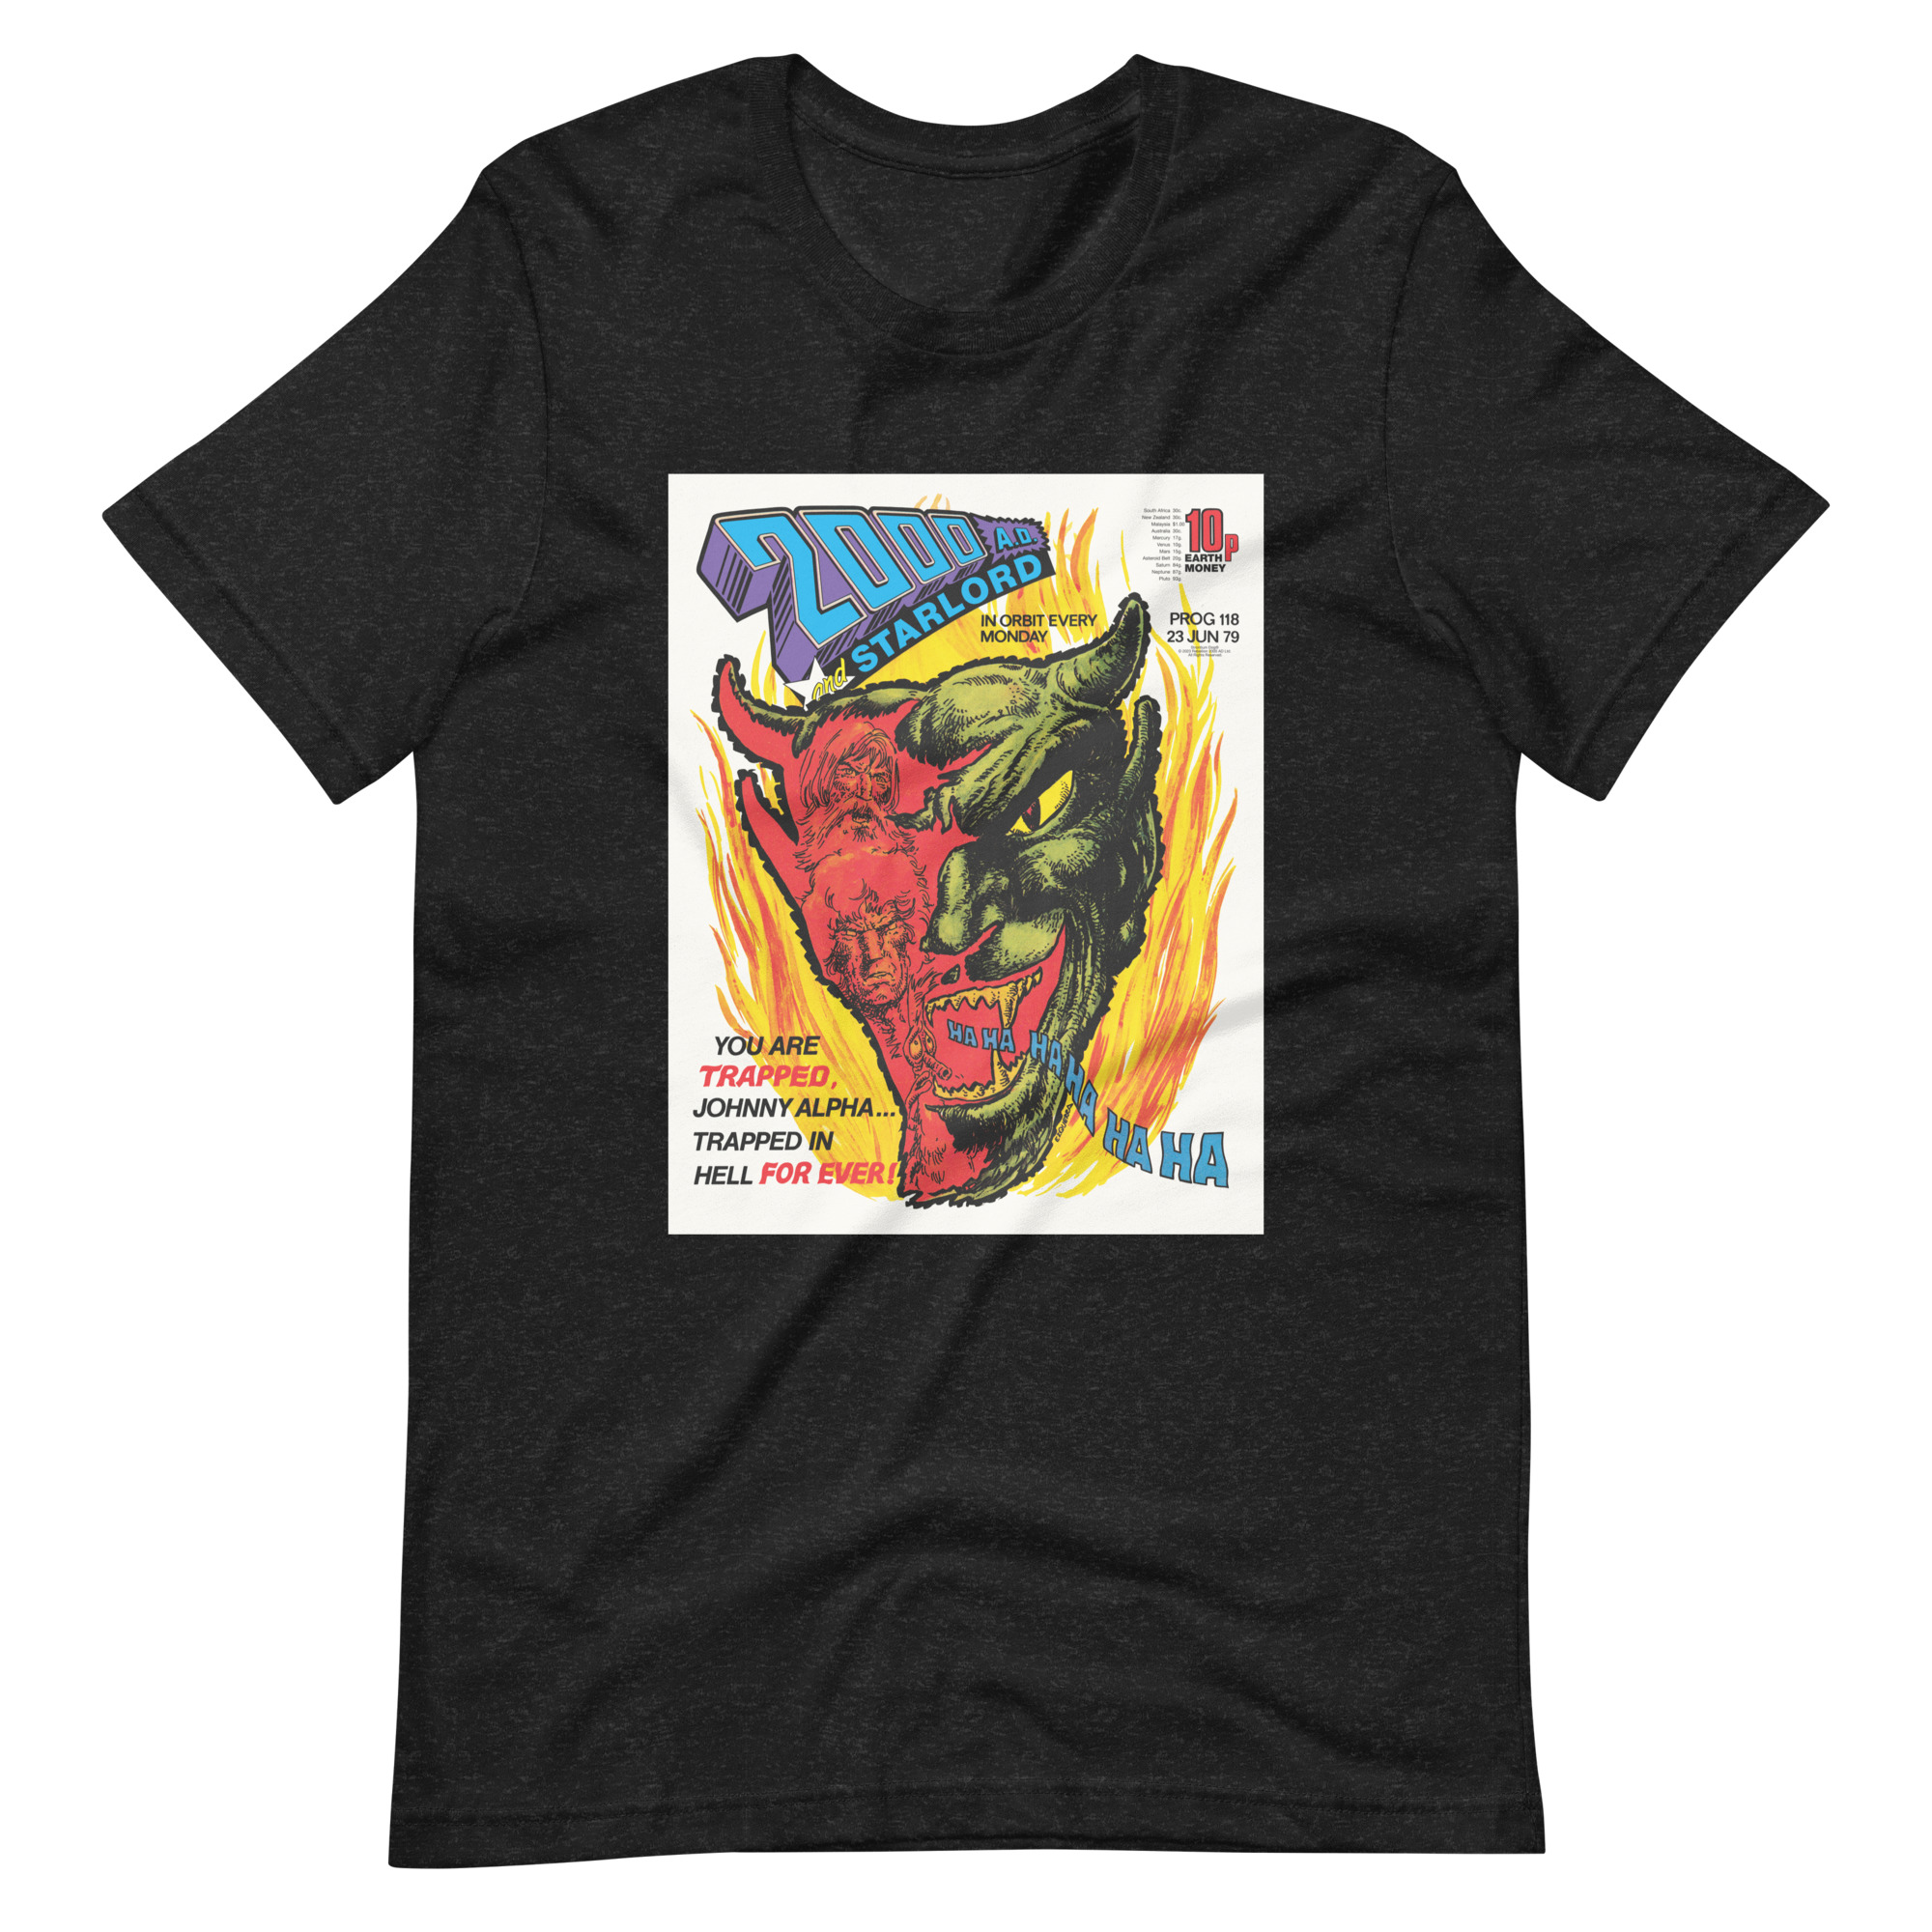 Charcoal Gray Tshirt with an image on the chest. Image is cover of 2000 AD prog 118 and depicts a laughing Devil face in flames